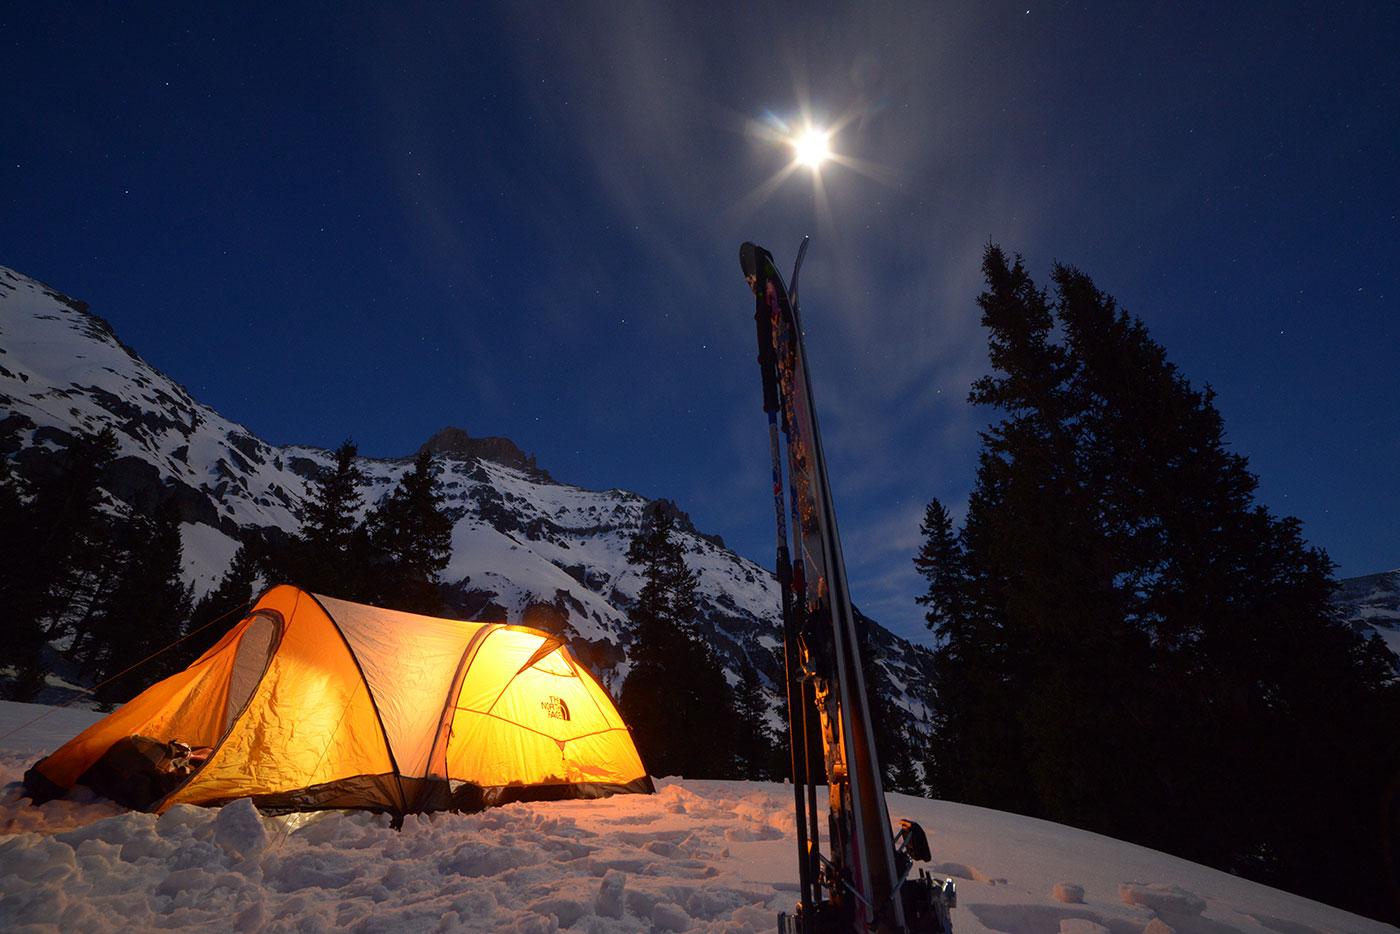 A nighttime camp for a skiing expedition in the Rocky Mountains. Photo: BBC